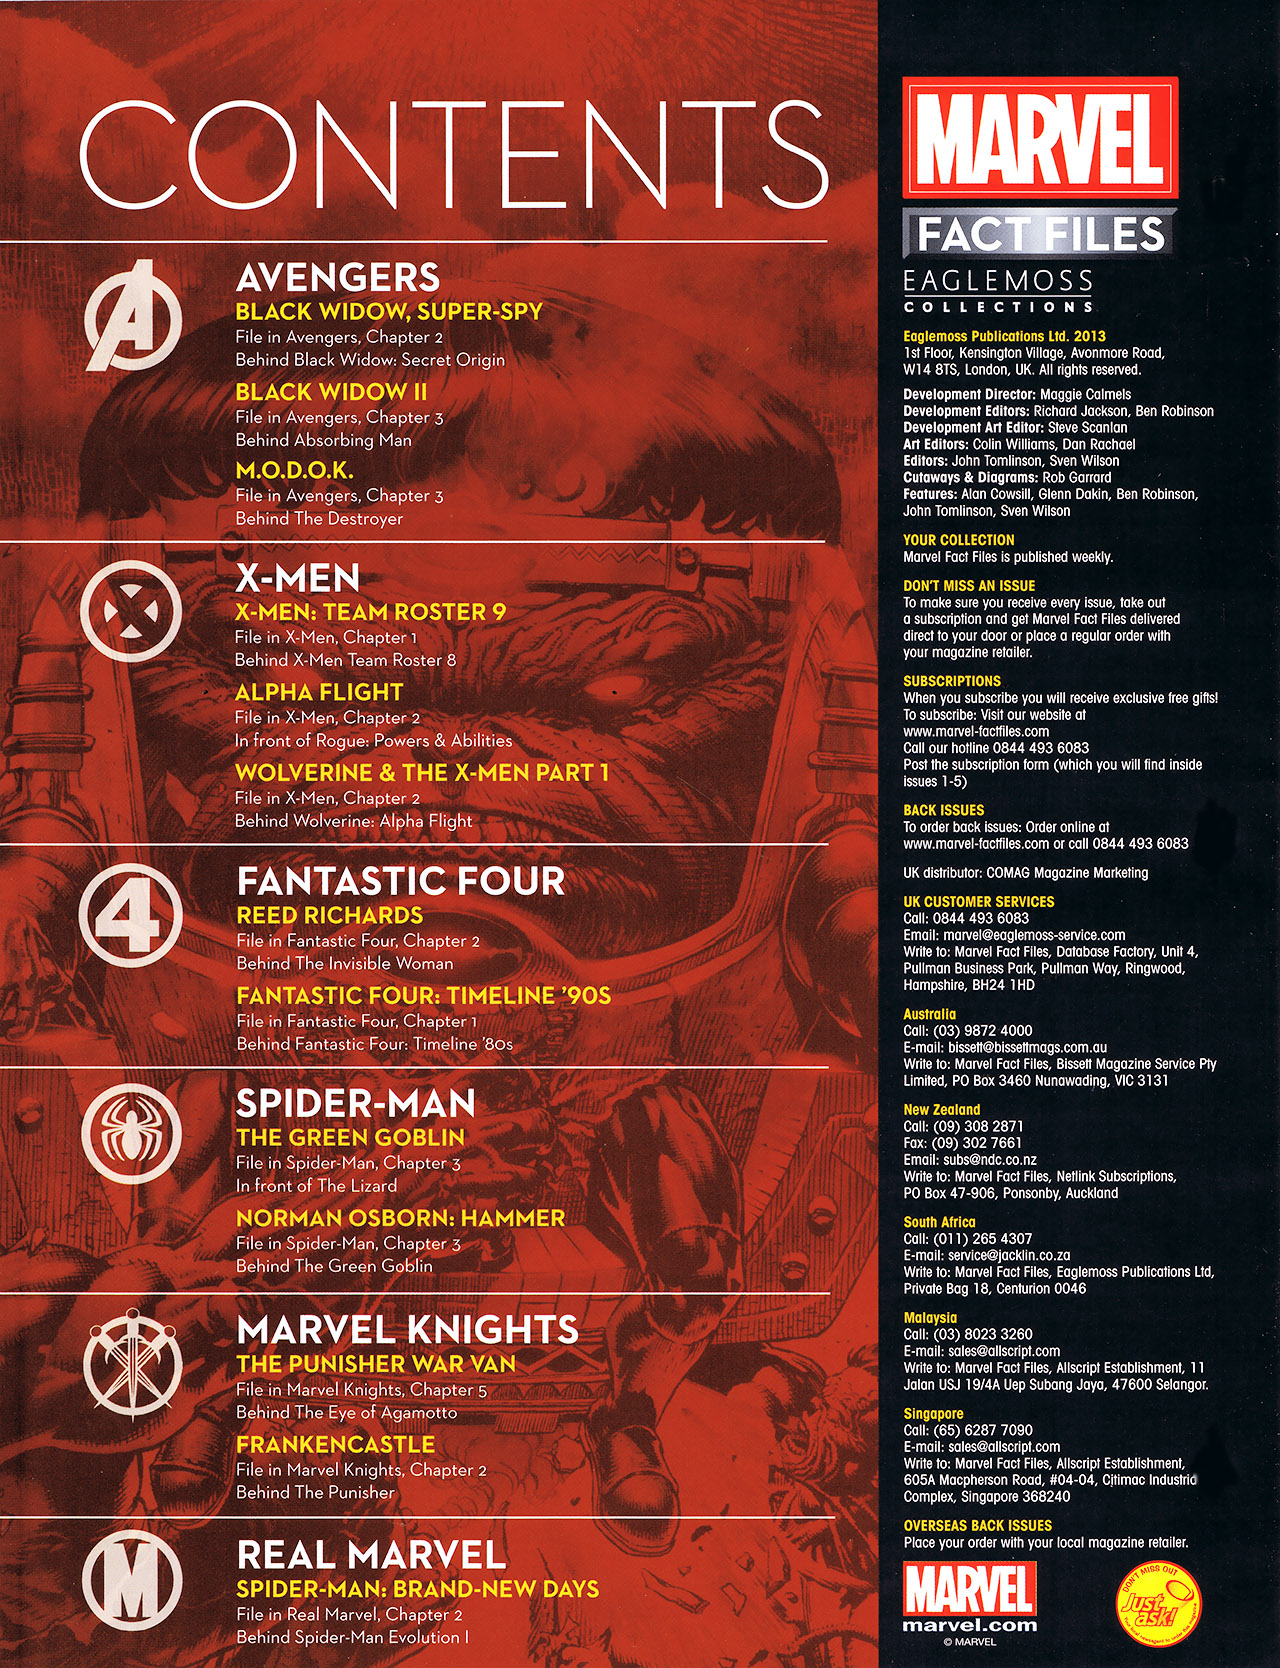 Read online Marvel Fact Files comic -  Issue #9 - 2